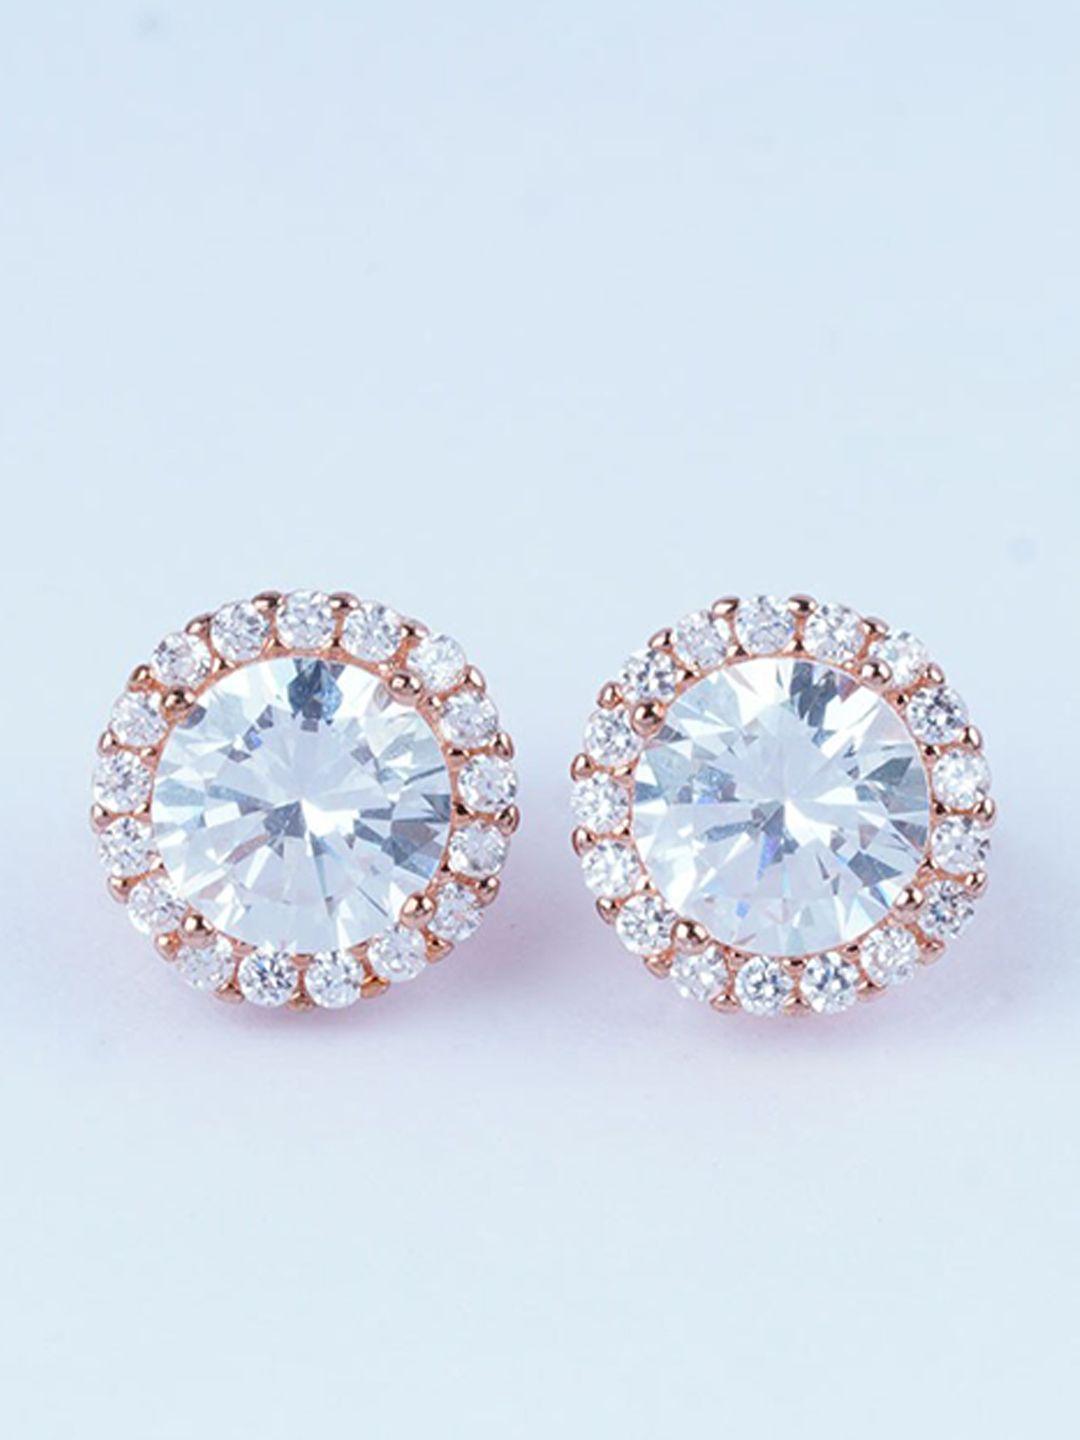 925 siller 925 pure silver rhodium-plated contemporary studs earrings